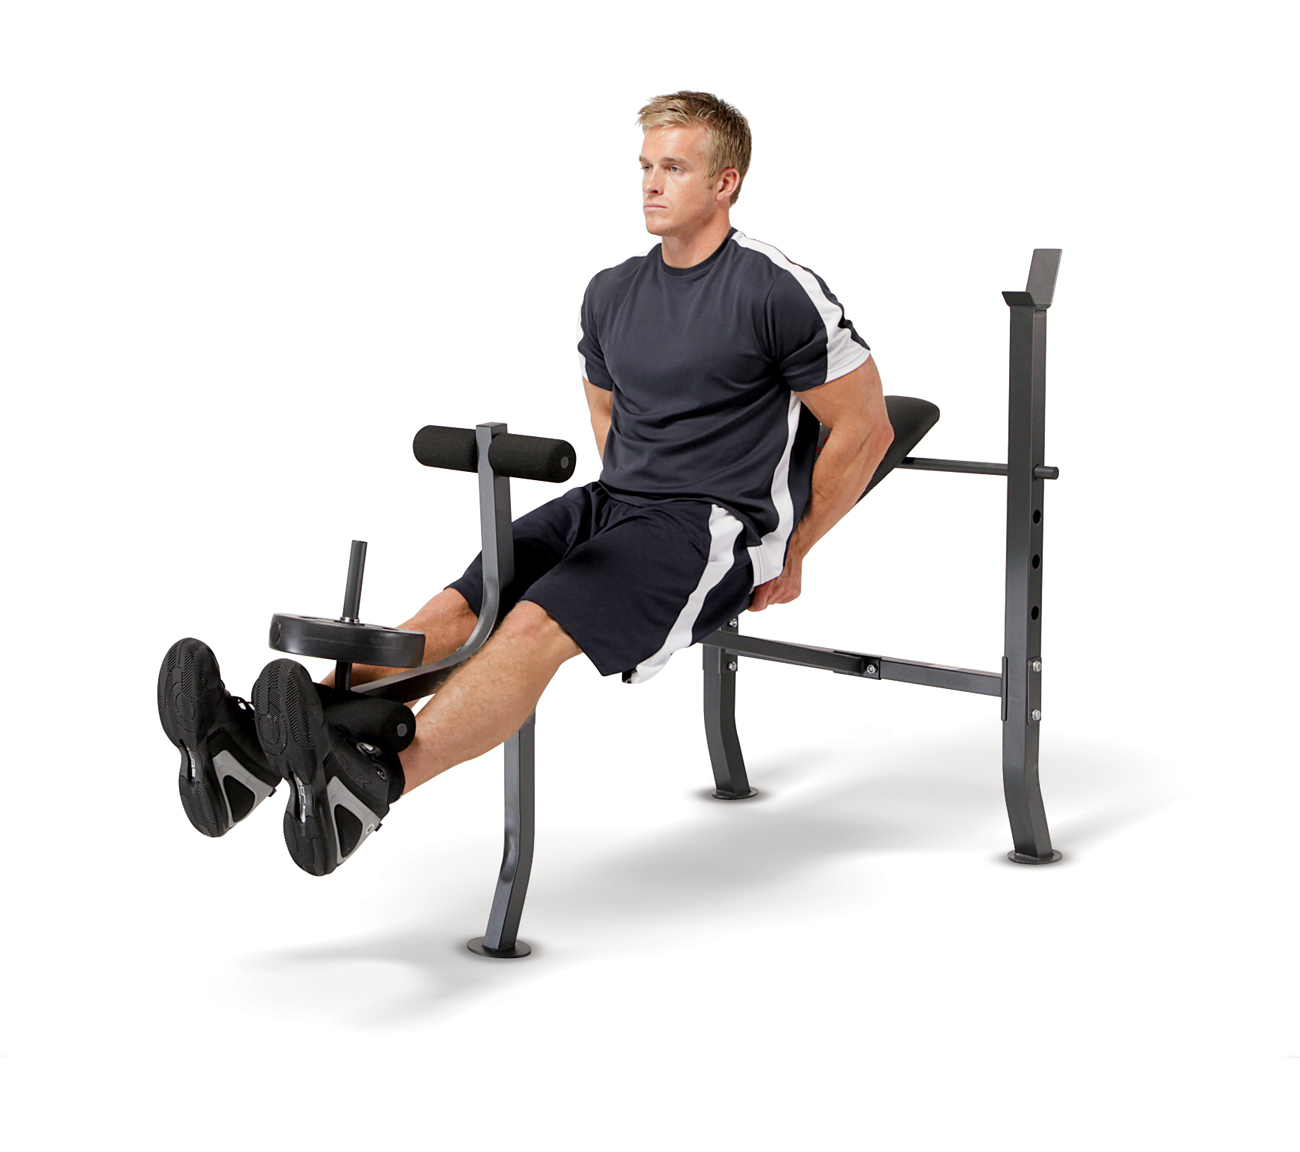 Marcy Standard Bench with 80 lb Weight Set Home Gym Workout Equipment - image 4 of 5